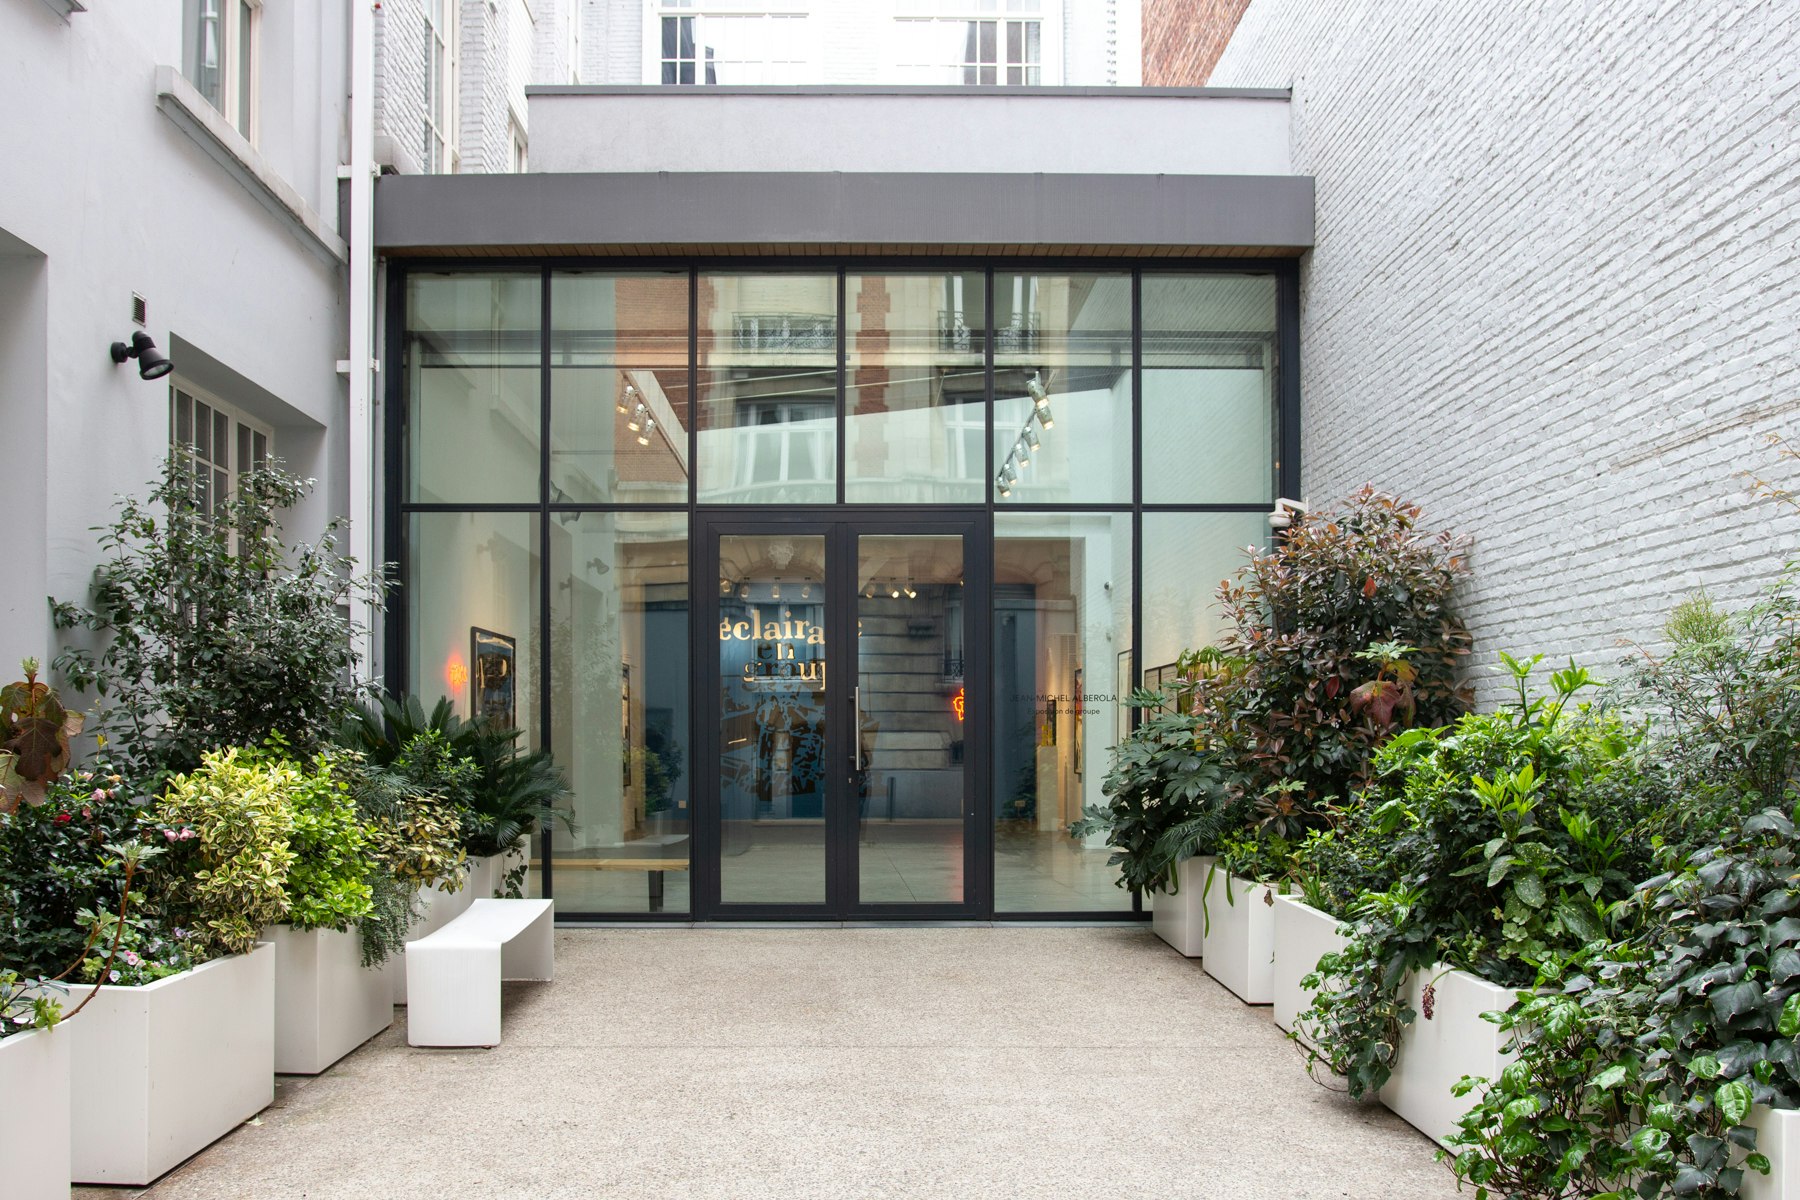 The metal and glass entrance to the Daniel Templon gallery; it's at the end of a short approach lined with greenery in planters; there are taller grey buildings on either side.